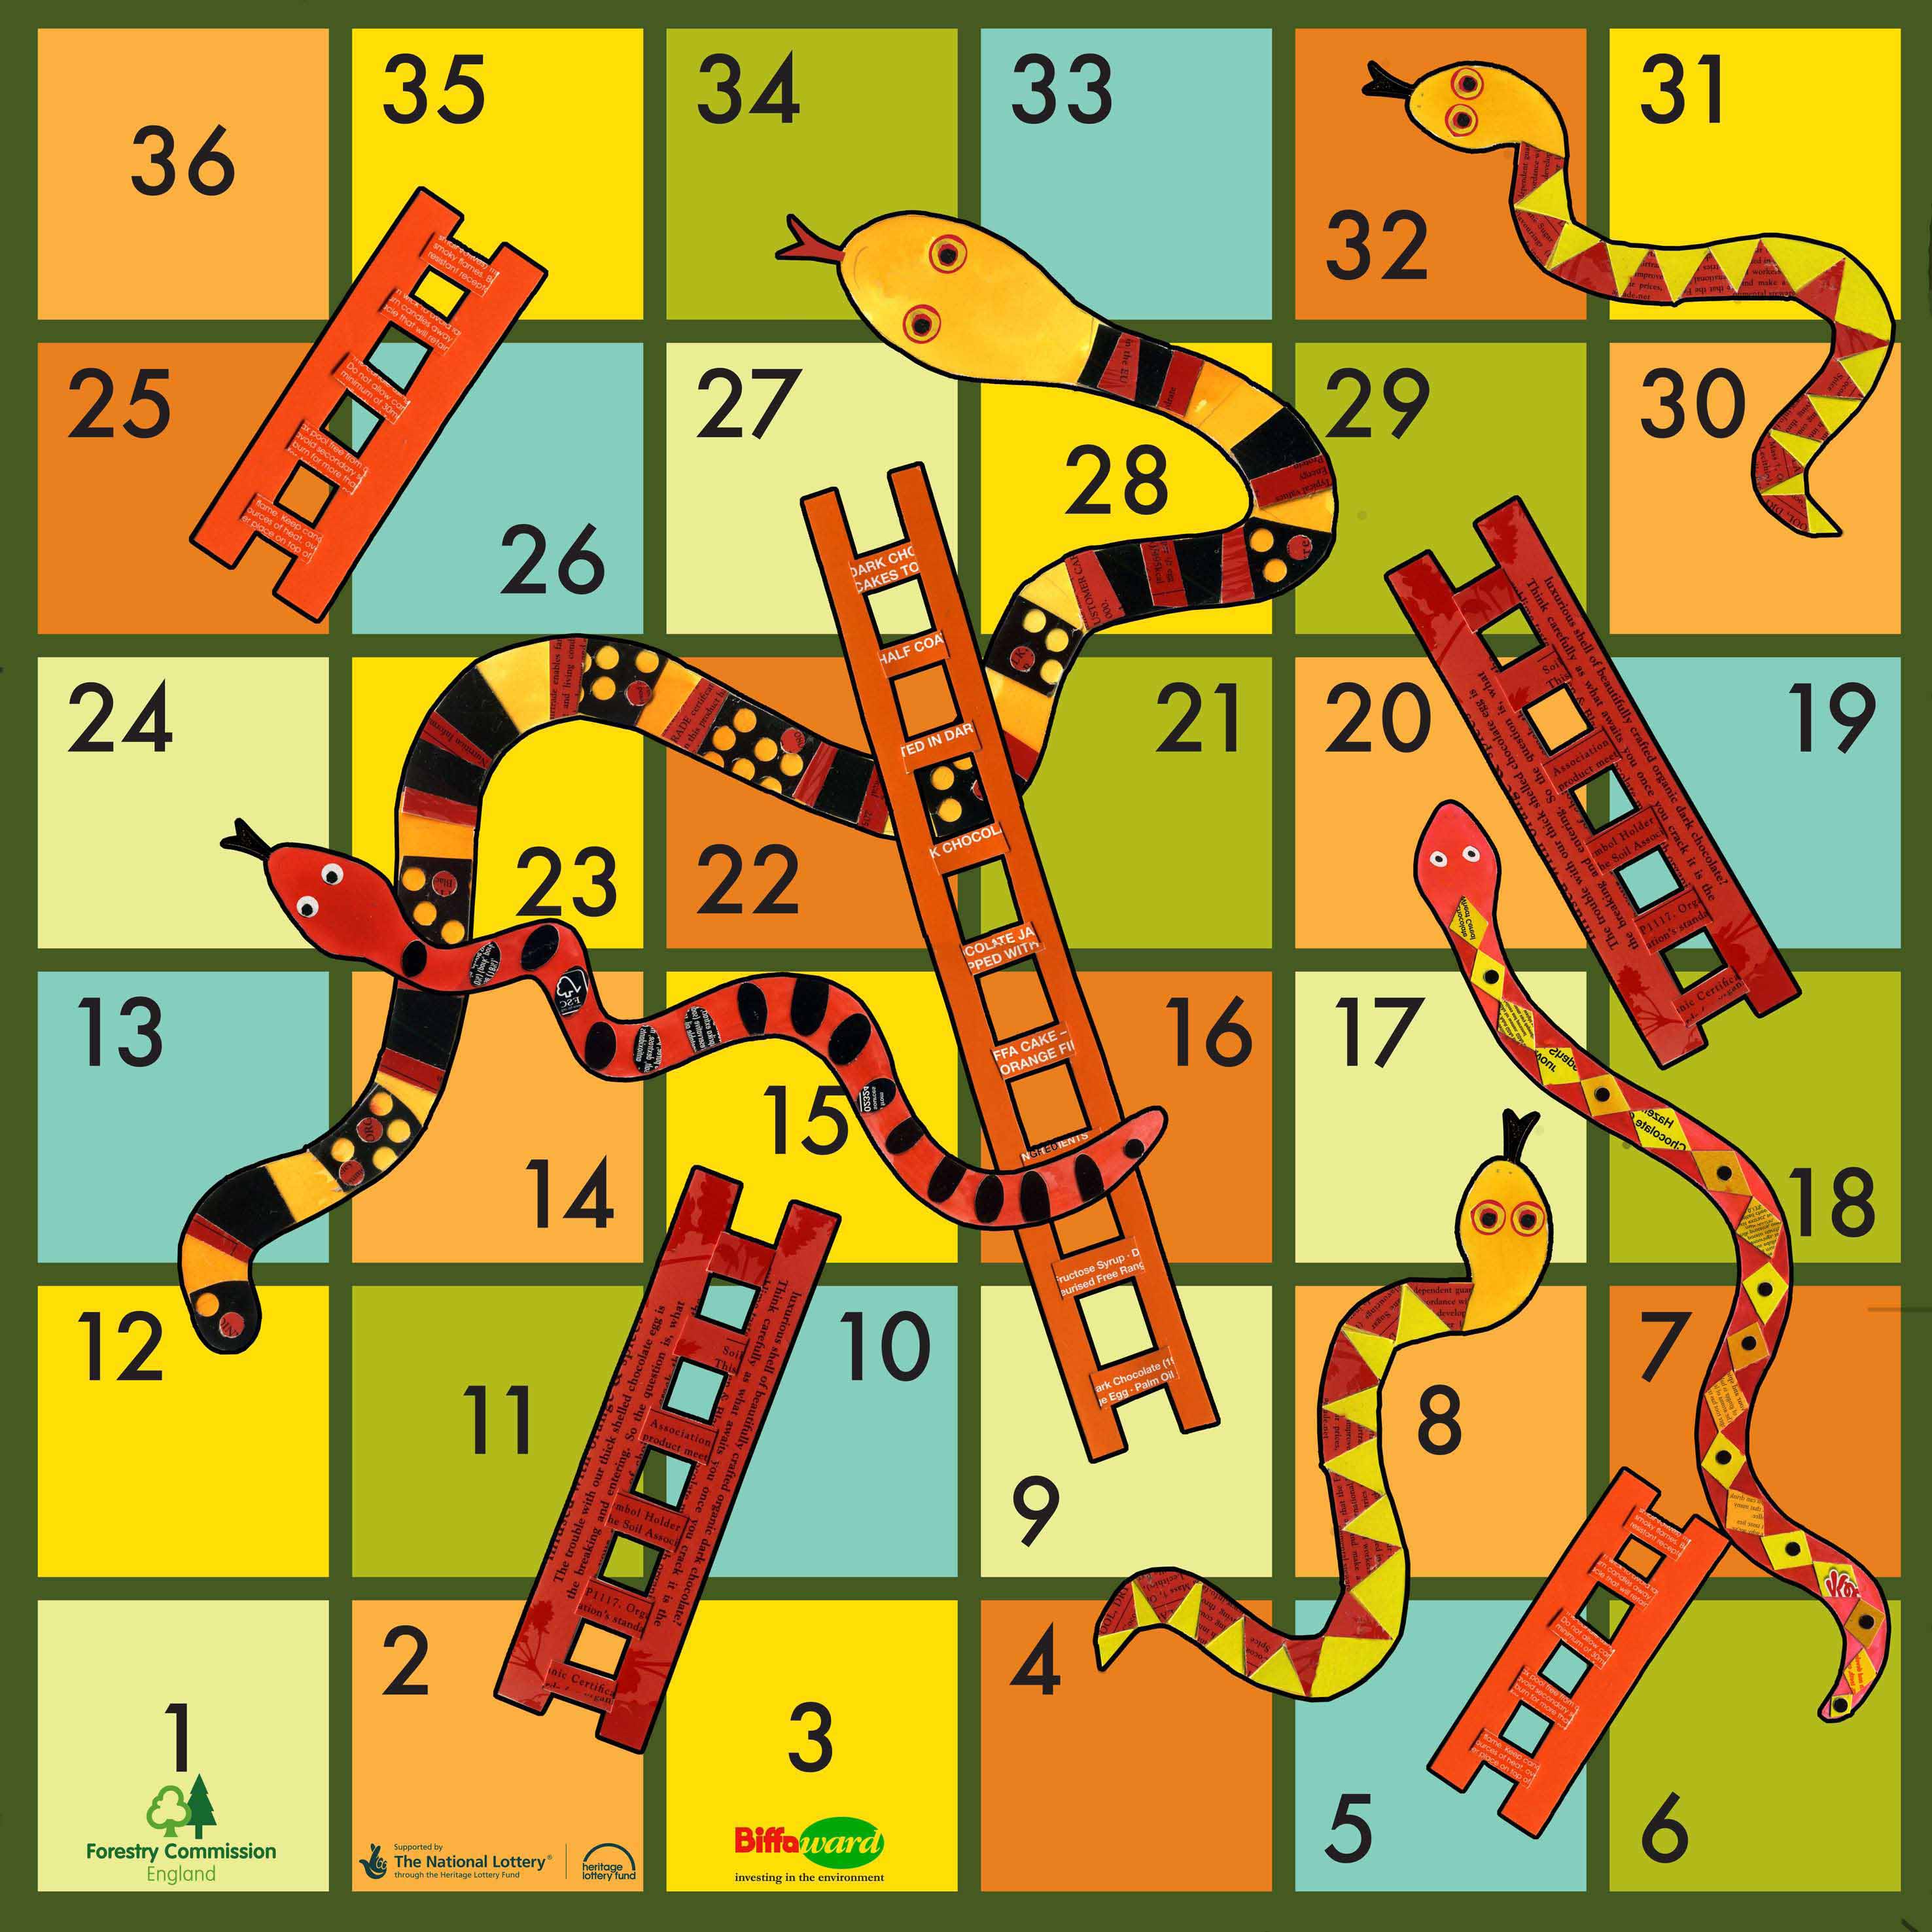 T2: Snake and Ladders – GRAFOS